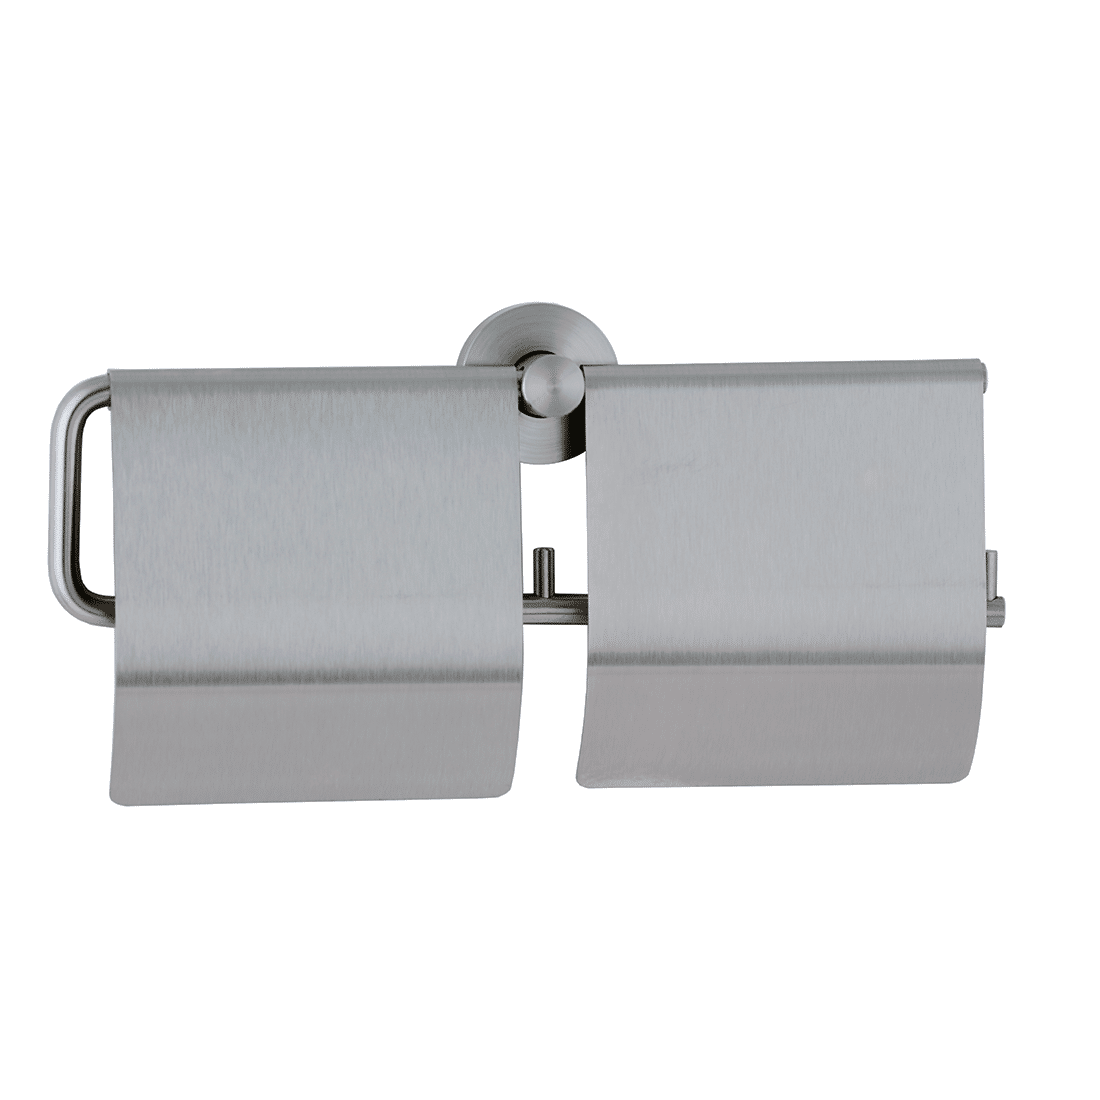 Bobrick Cubicle Collection Double Toilet Tissue Dispenser with Hoods B-548,...